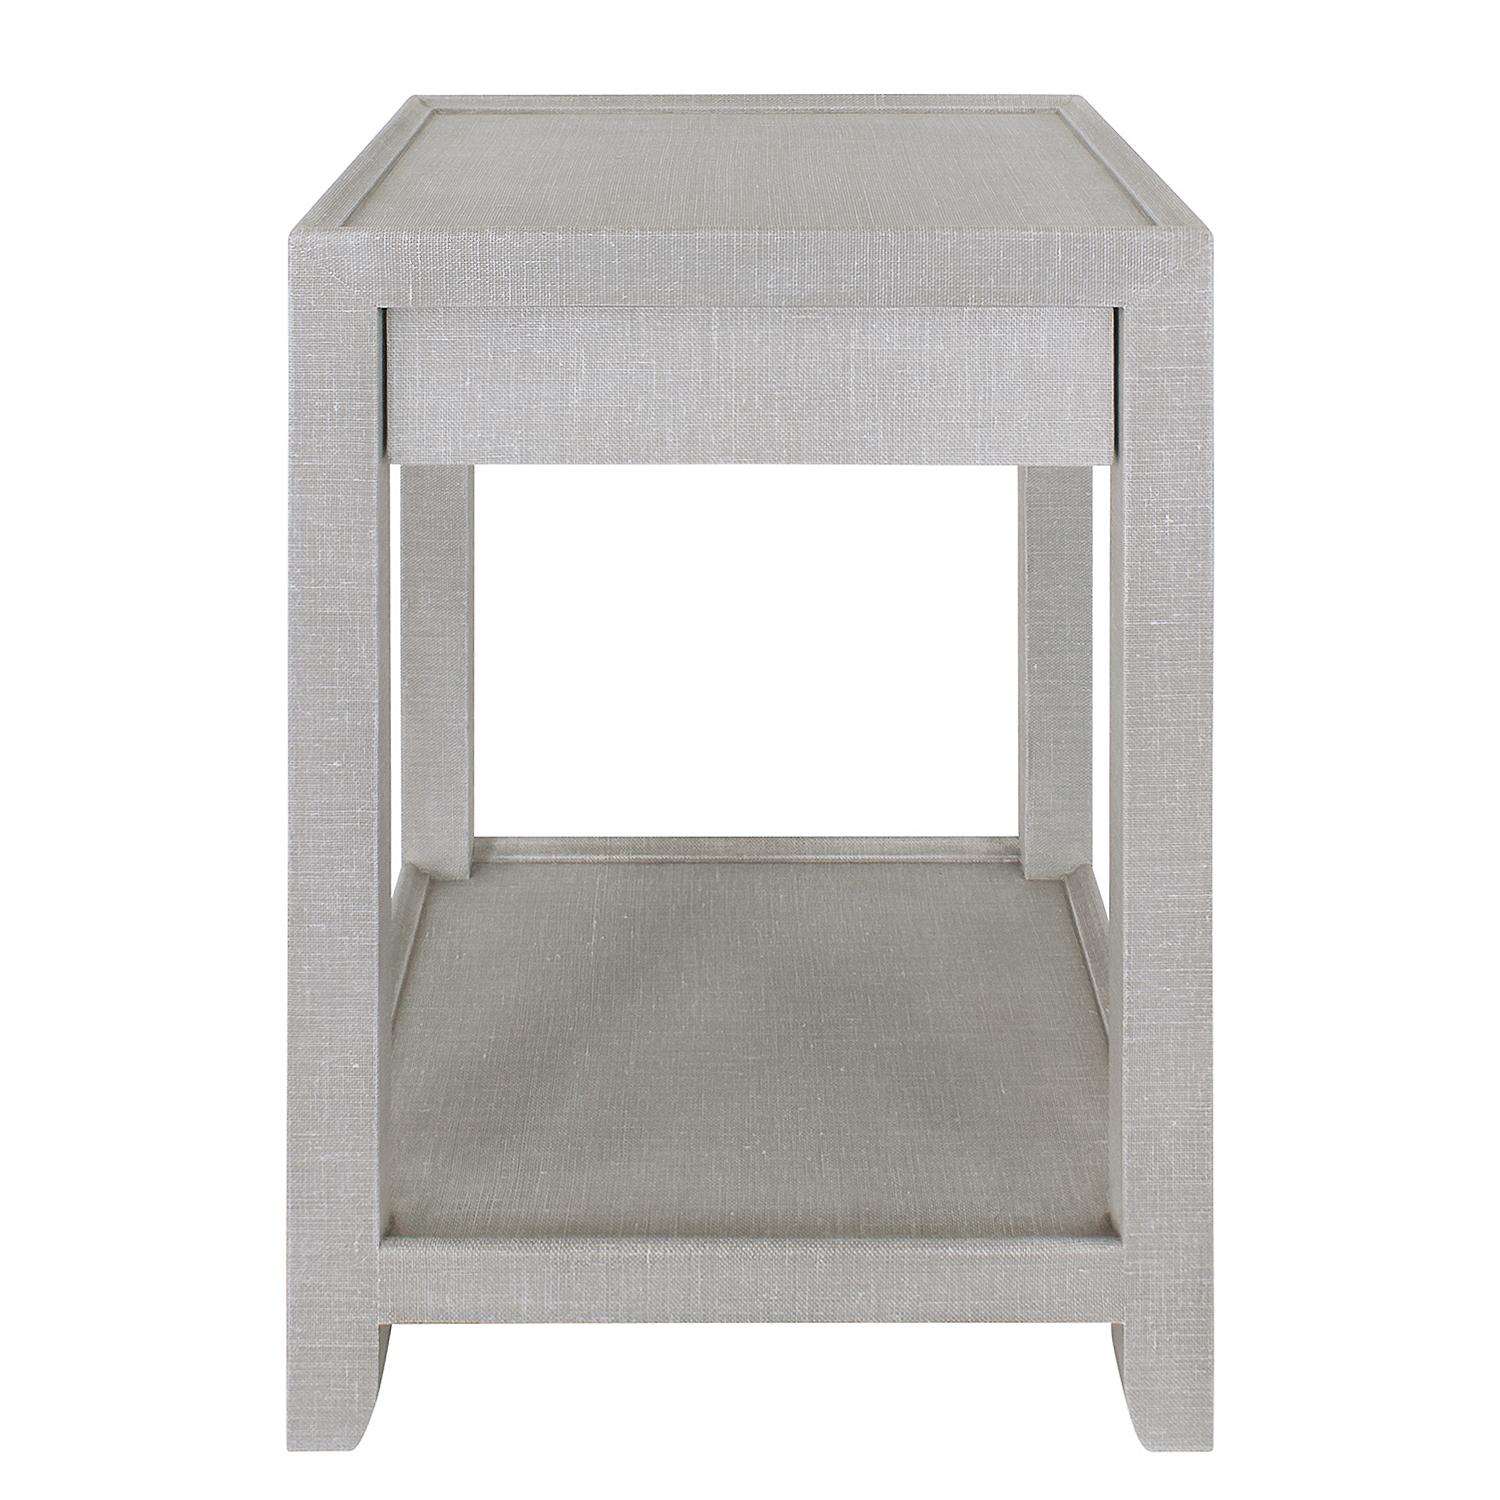 Pair of raised edge bedside tables with drawer under apron covered in 2 tone lacquered linen by Lobel Originals. Drawer lined with moire silk. This piece can be made in any size, material (snake skin, shagreen, and lacquered linen) and color (price